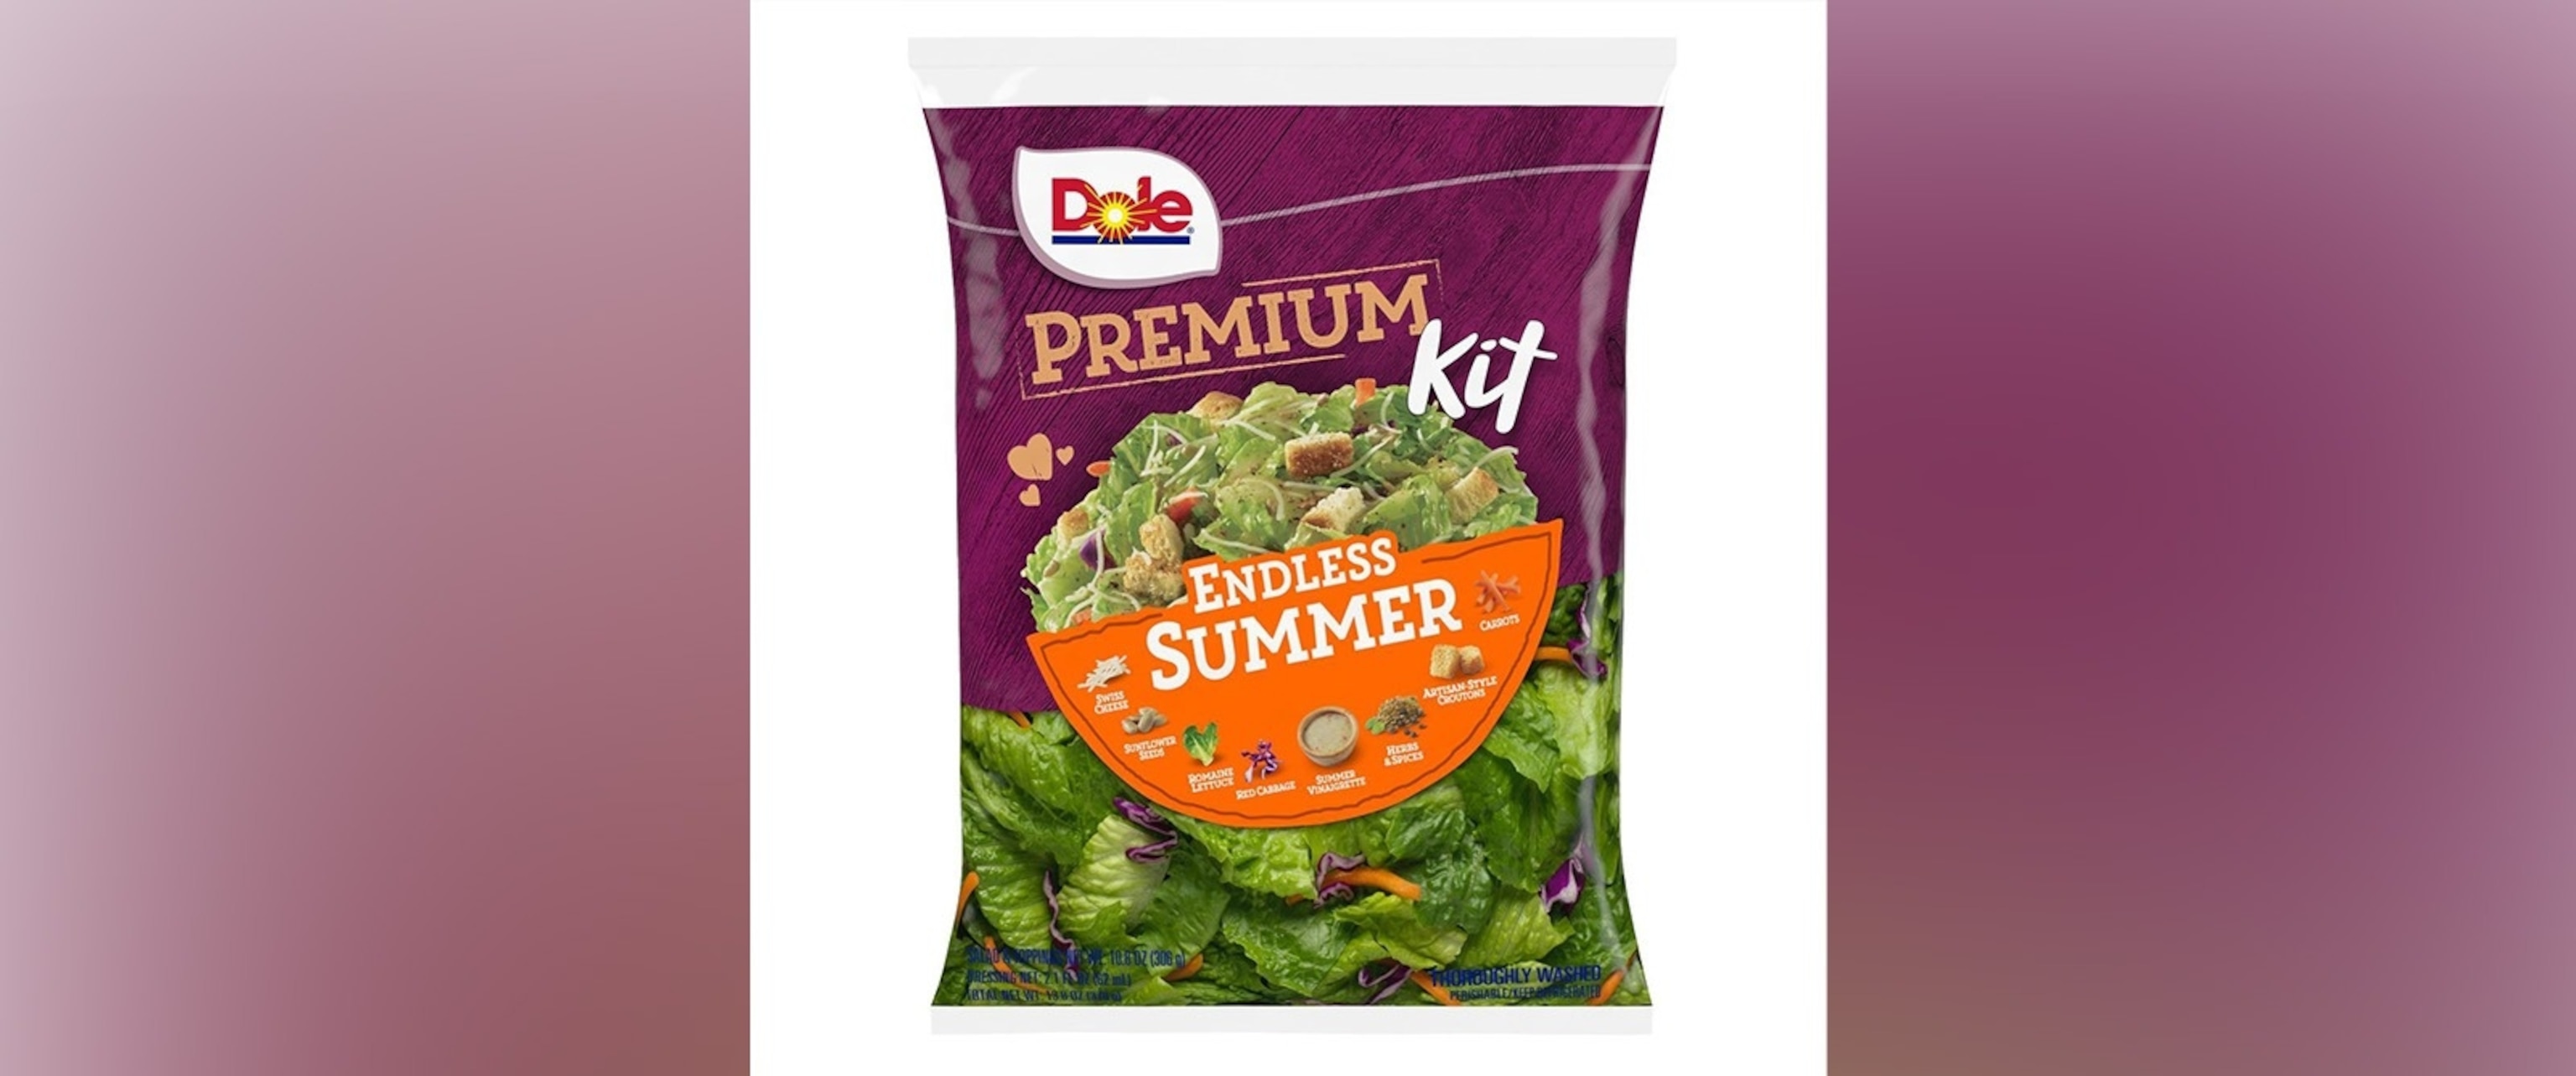 PHOTO: In this Jan. 29, 2021, file photo, Dole Endless Summer salad kit is shown.